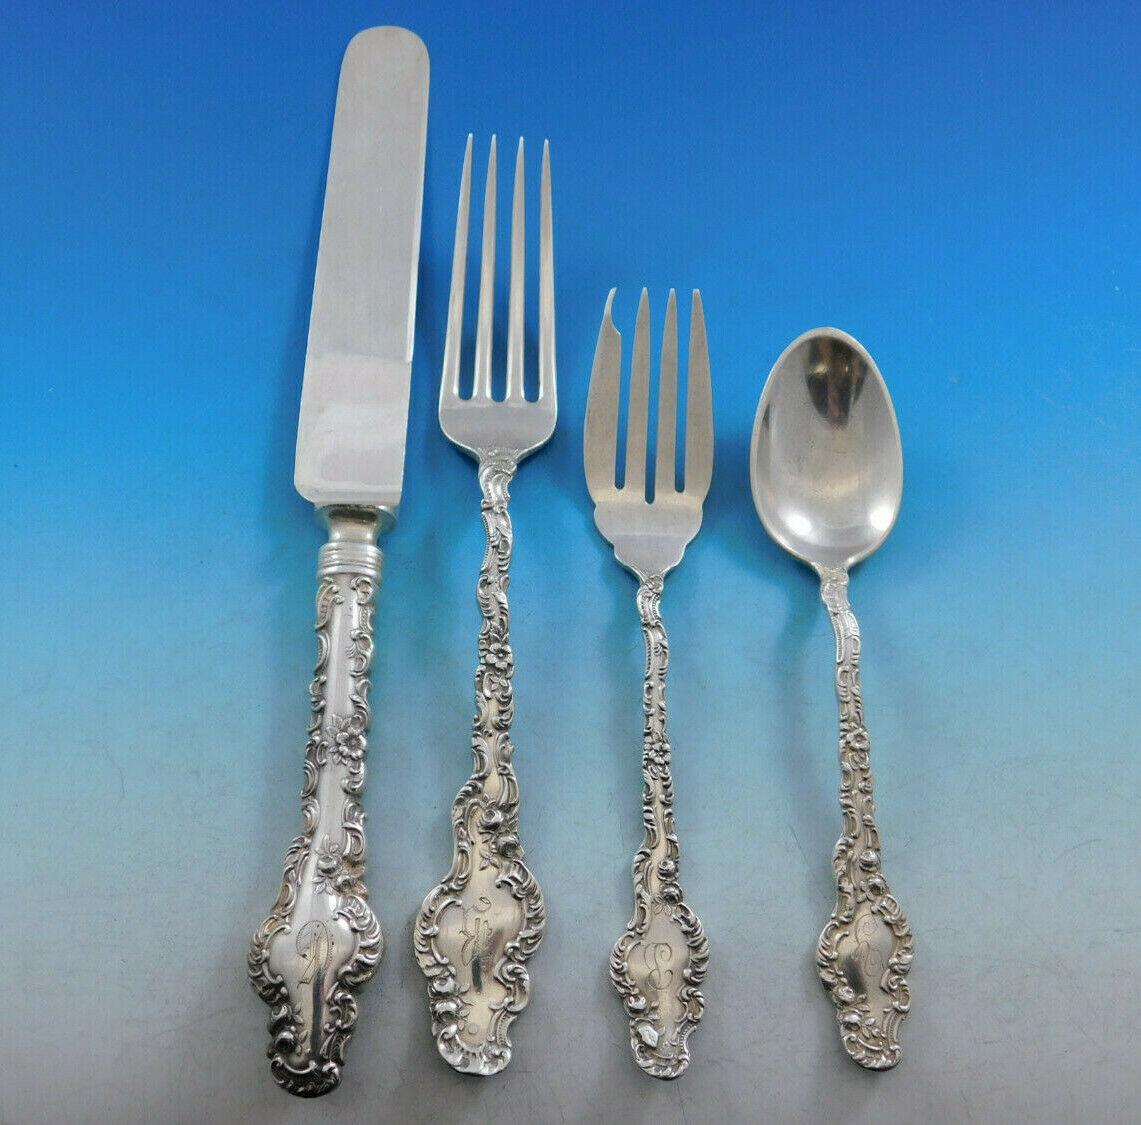 Monumental Watteau by Durgin circa 1890-1920 sterling silver dinner size flatware set - 168 pieces. This set includes:

12 dinner size knives, blunt blades, 9 5/8